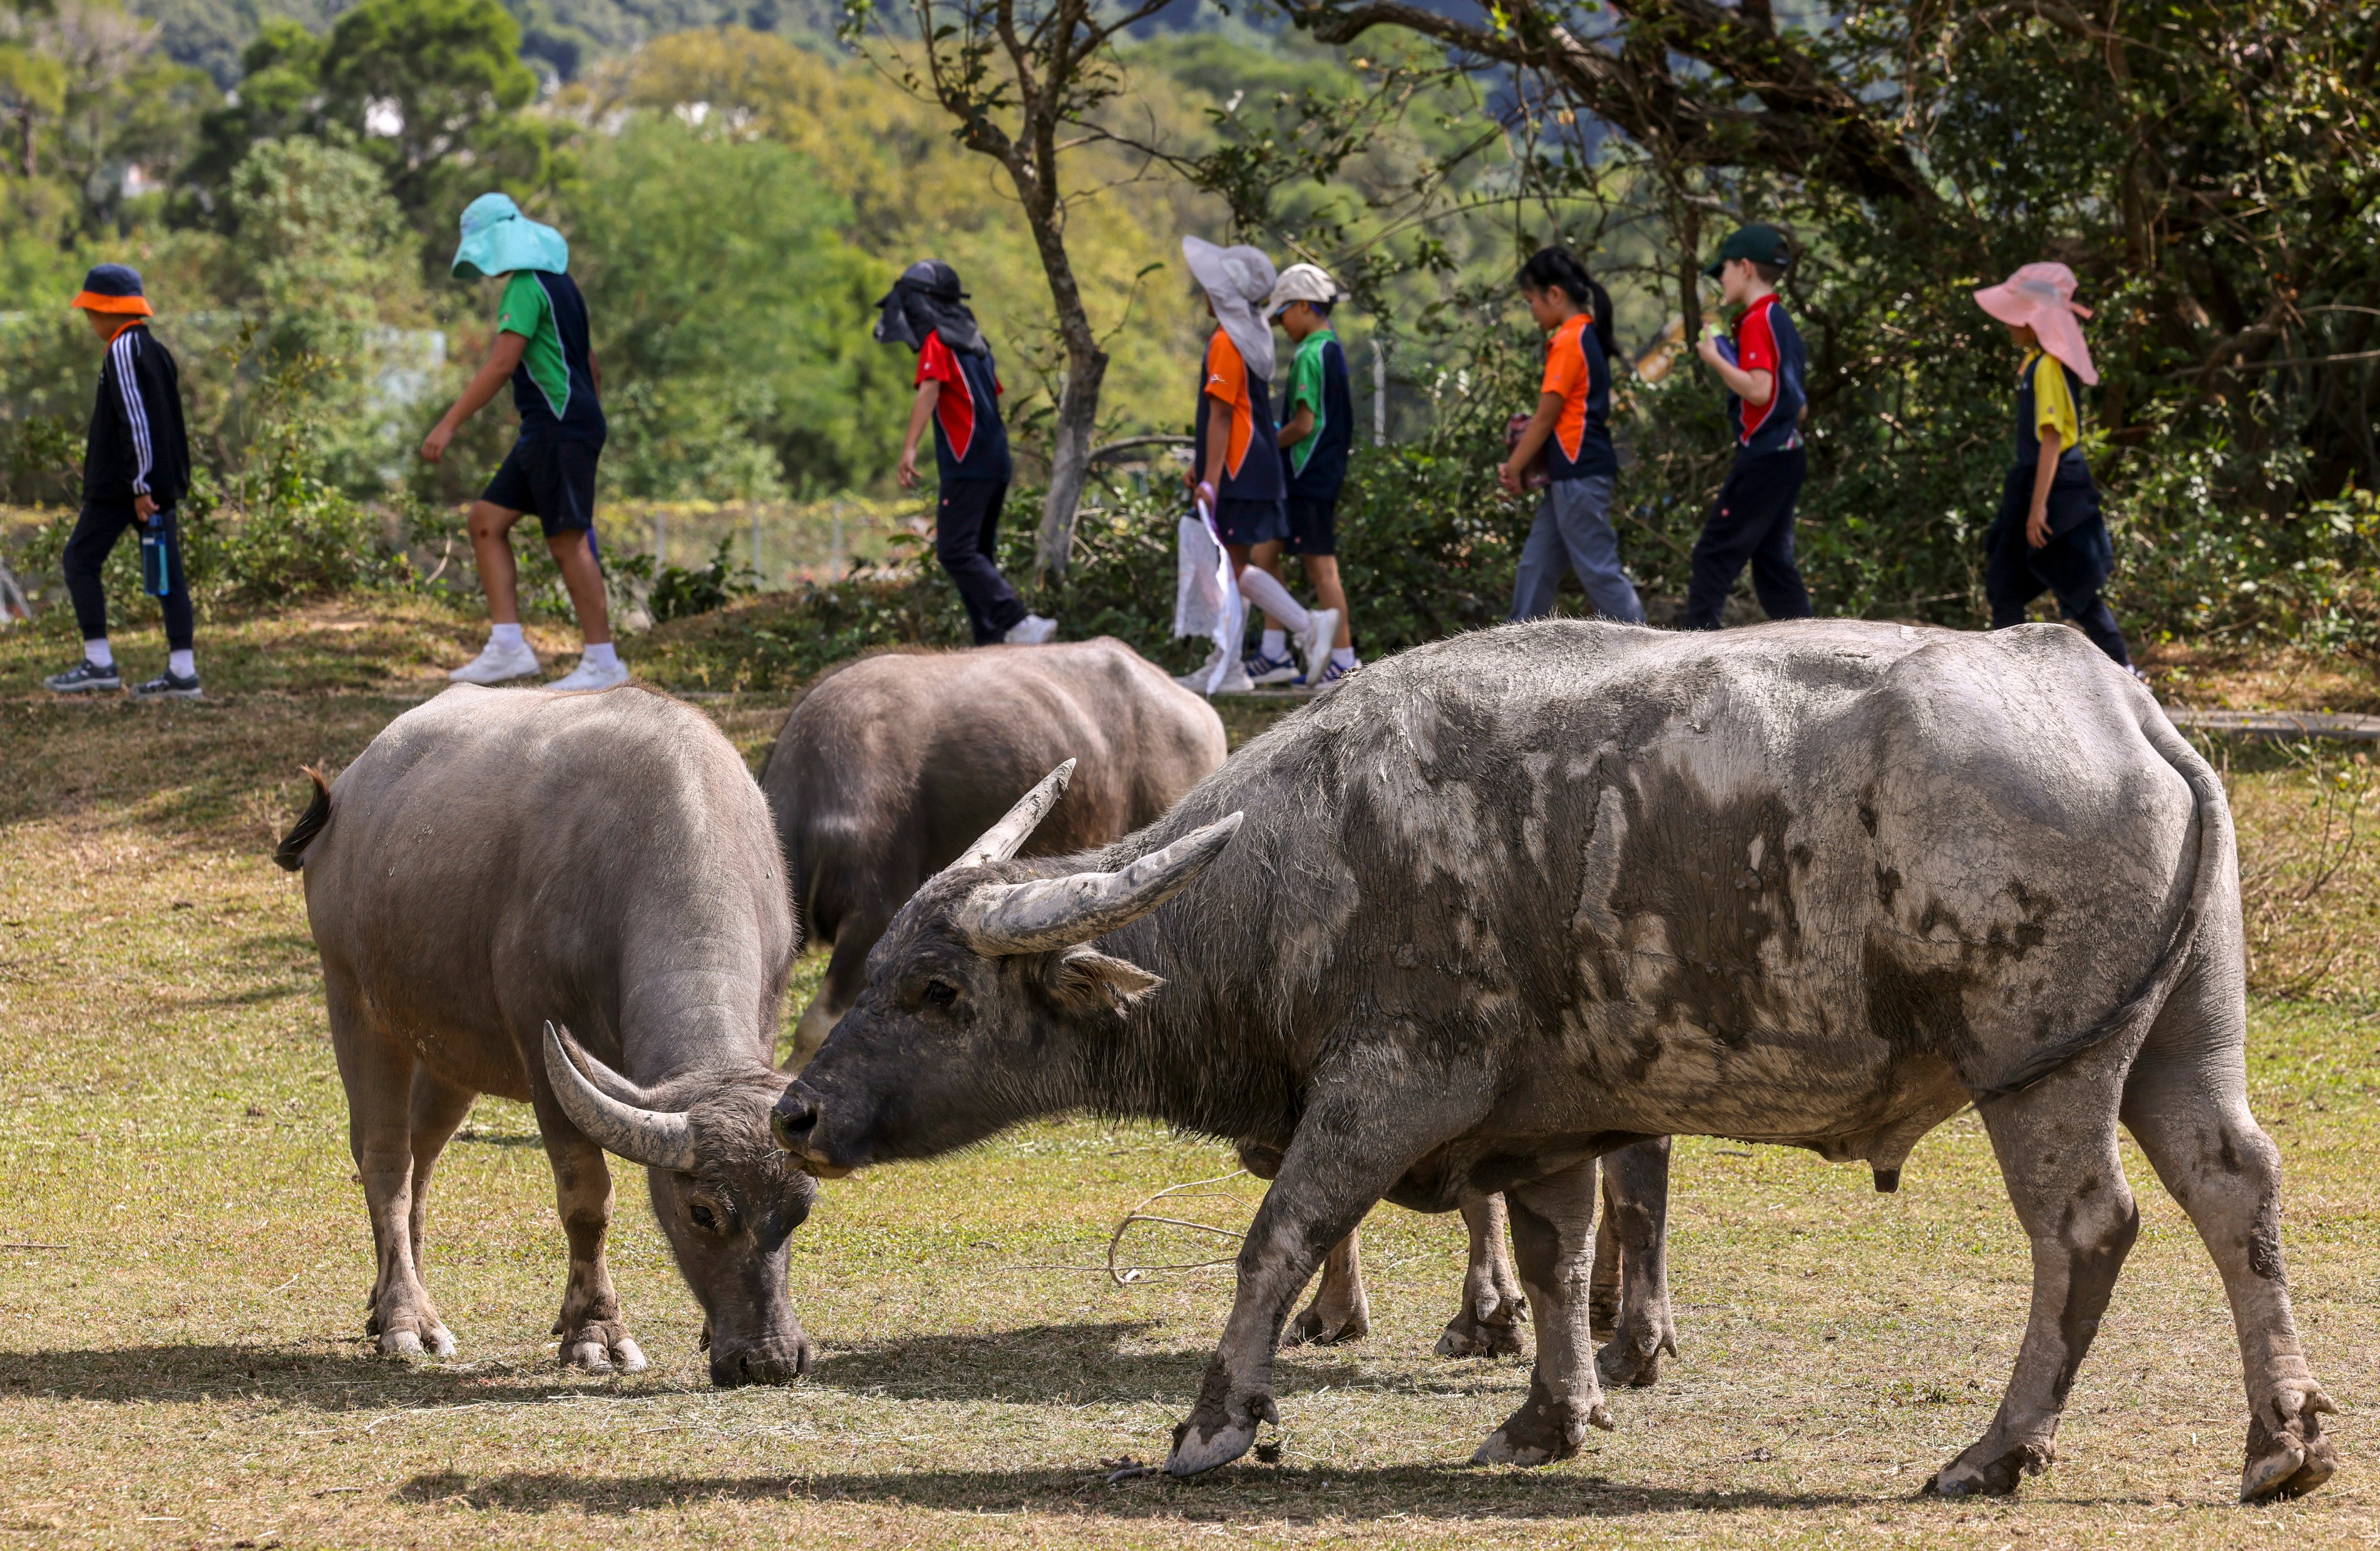 Water buffaloes in Pui O on Lantau Island. The animals were introduced there in the mid-1900s by farmers who used them to plough paddy fields. Photo: Dickson Lee